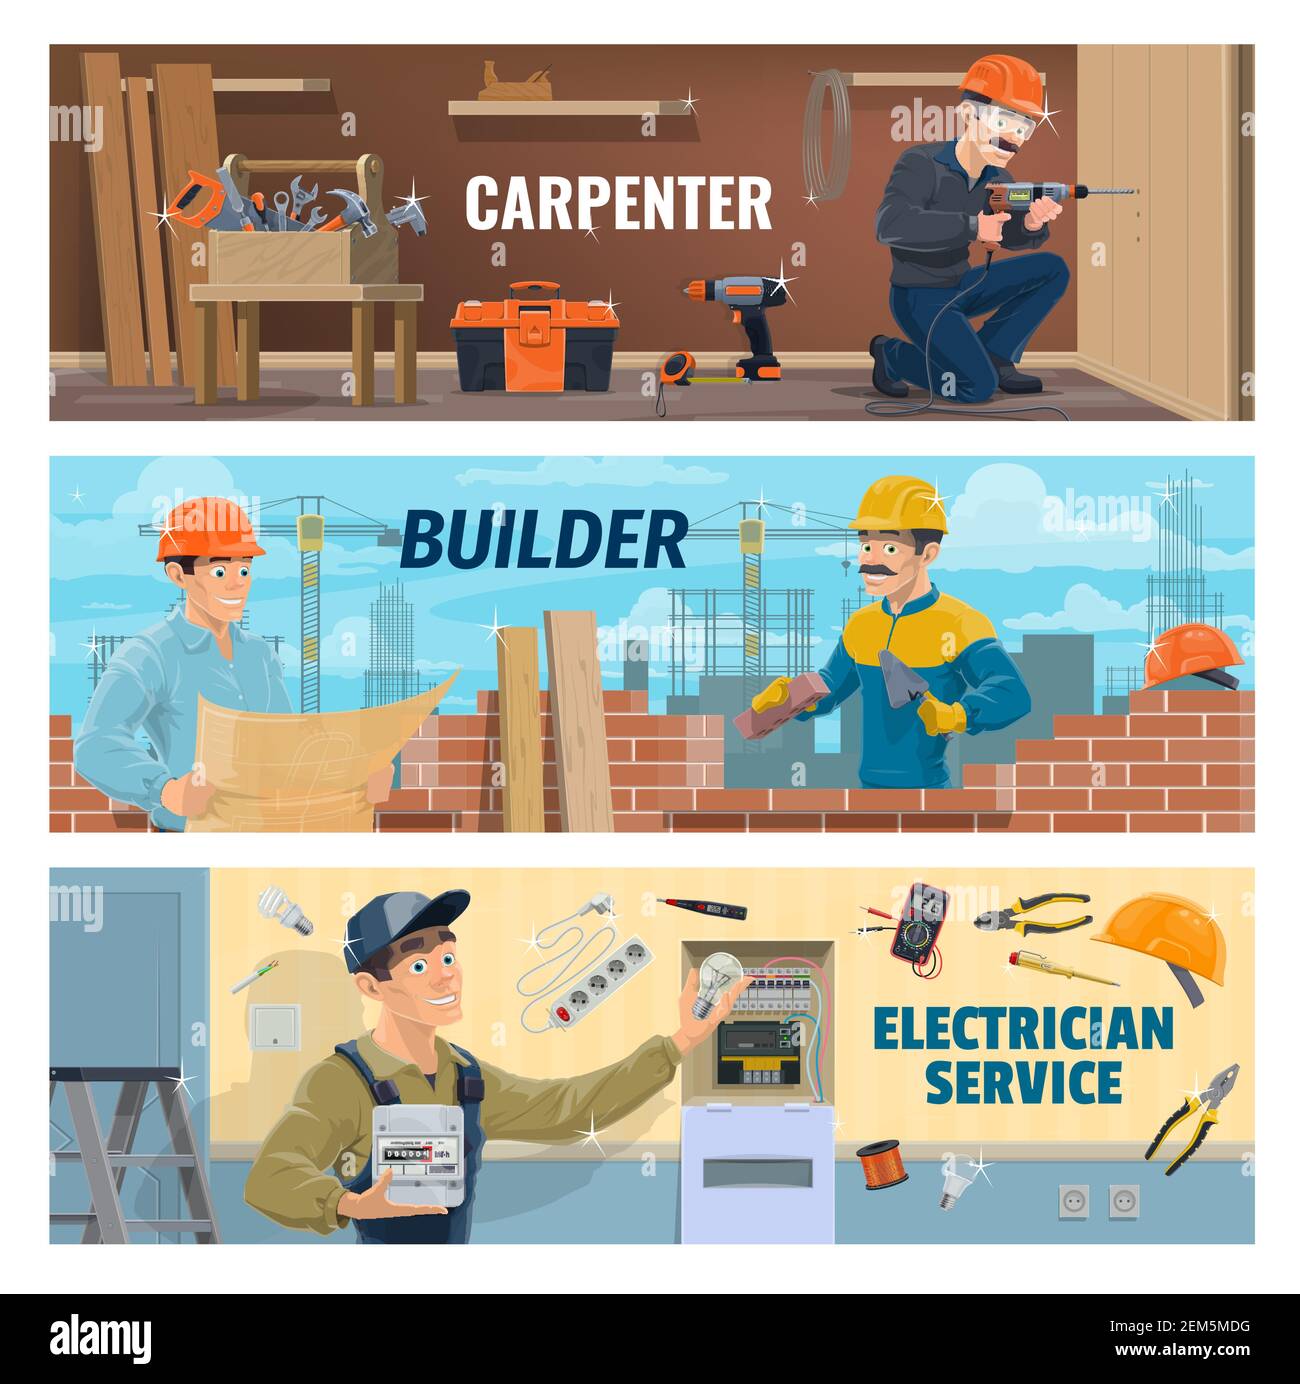 Carpenter, builder and electrician workers. Construction industry masters. Carpenter drilling a wood, builder laying a bricks, electrician installing Stock Vector